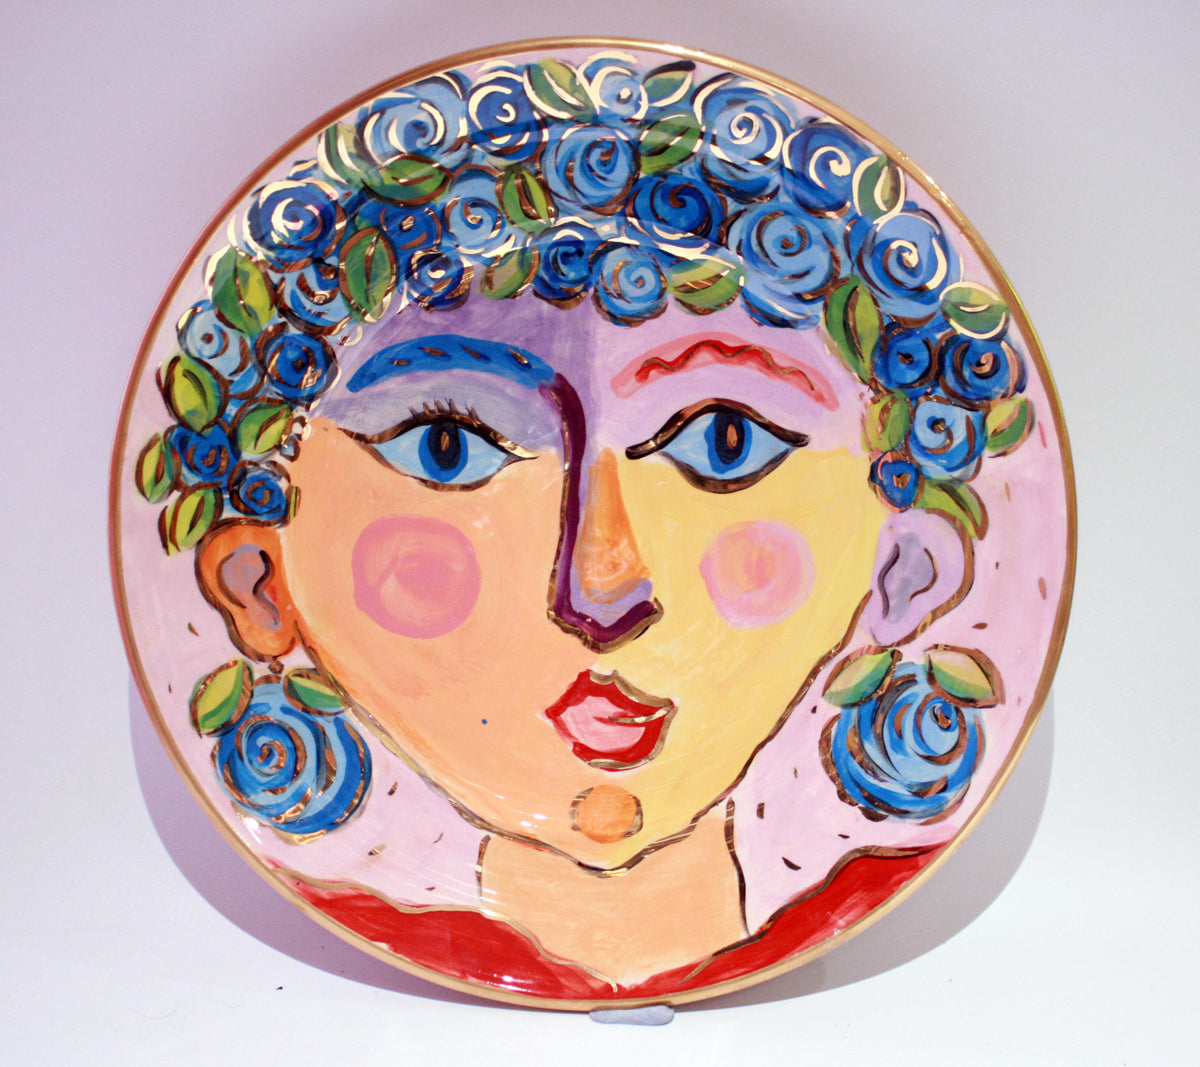 Faces Dinner Plate "Poppy" - MaryRoseYoung